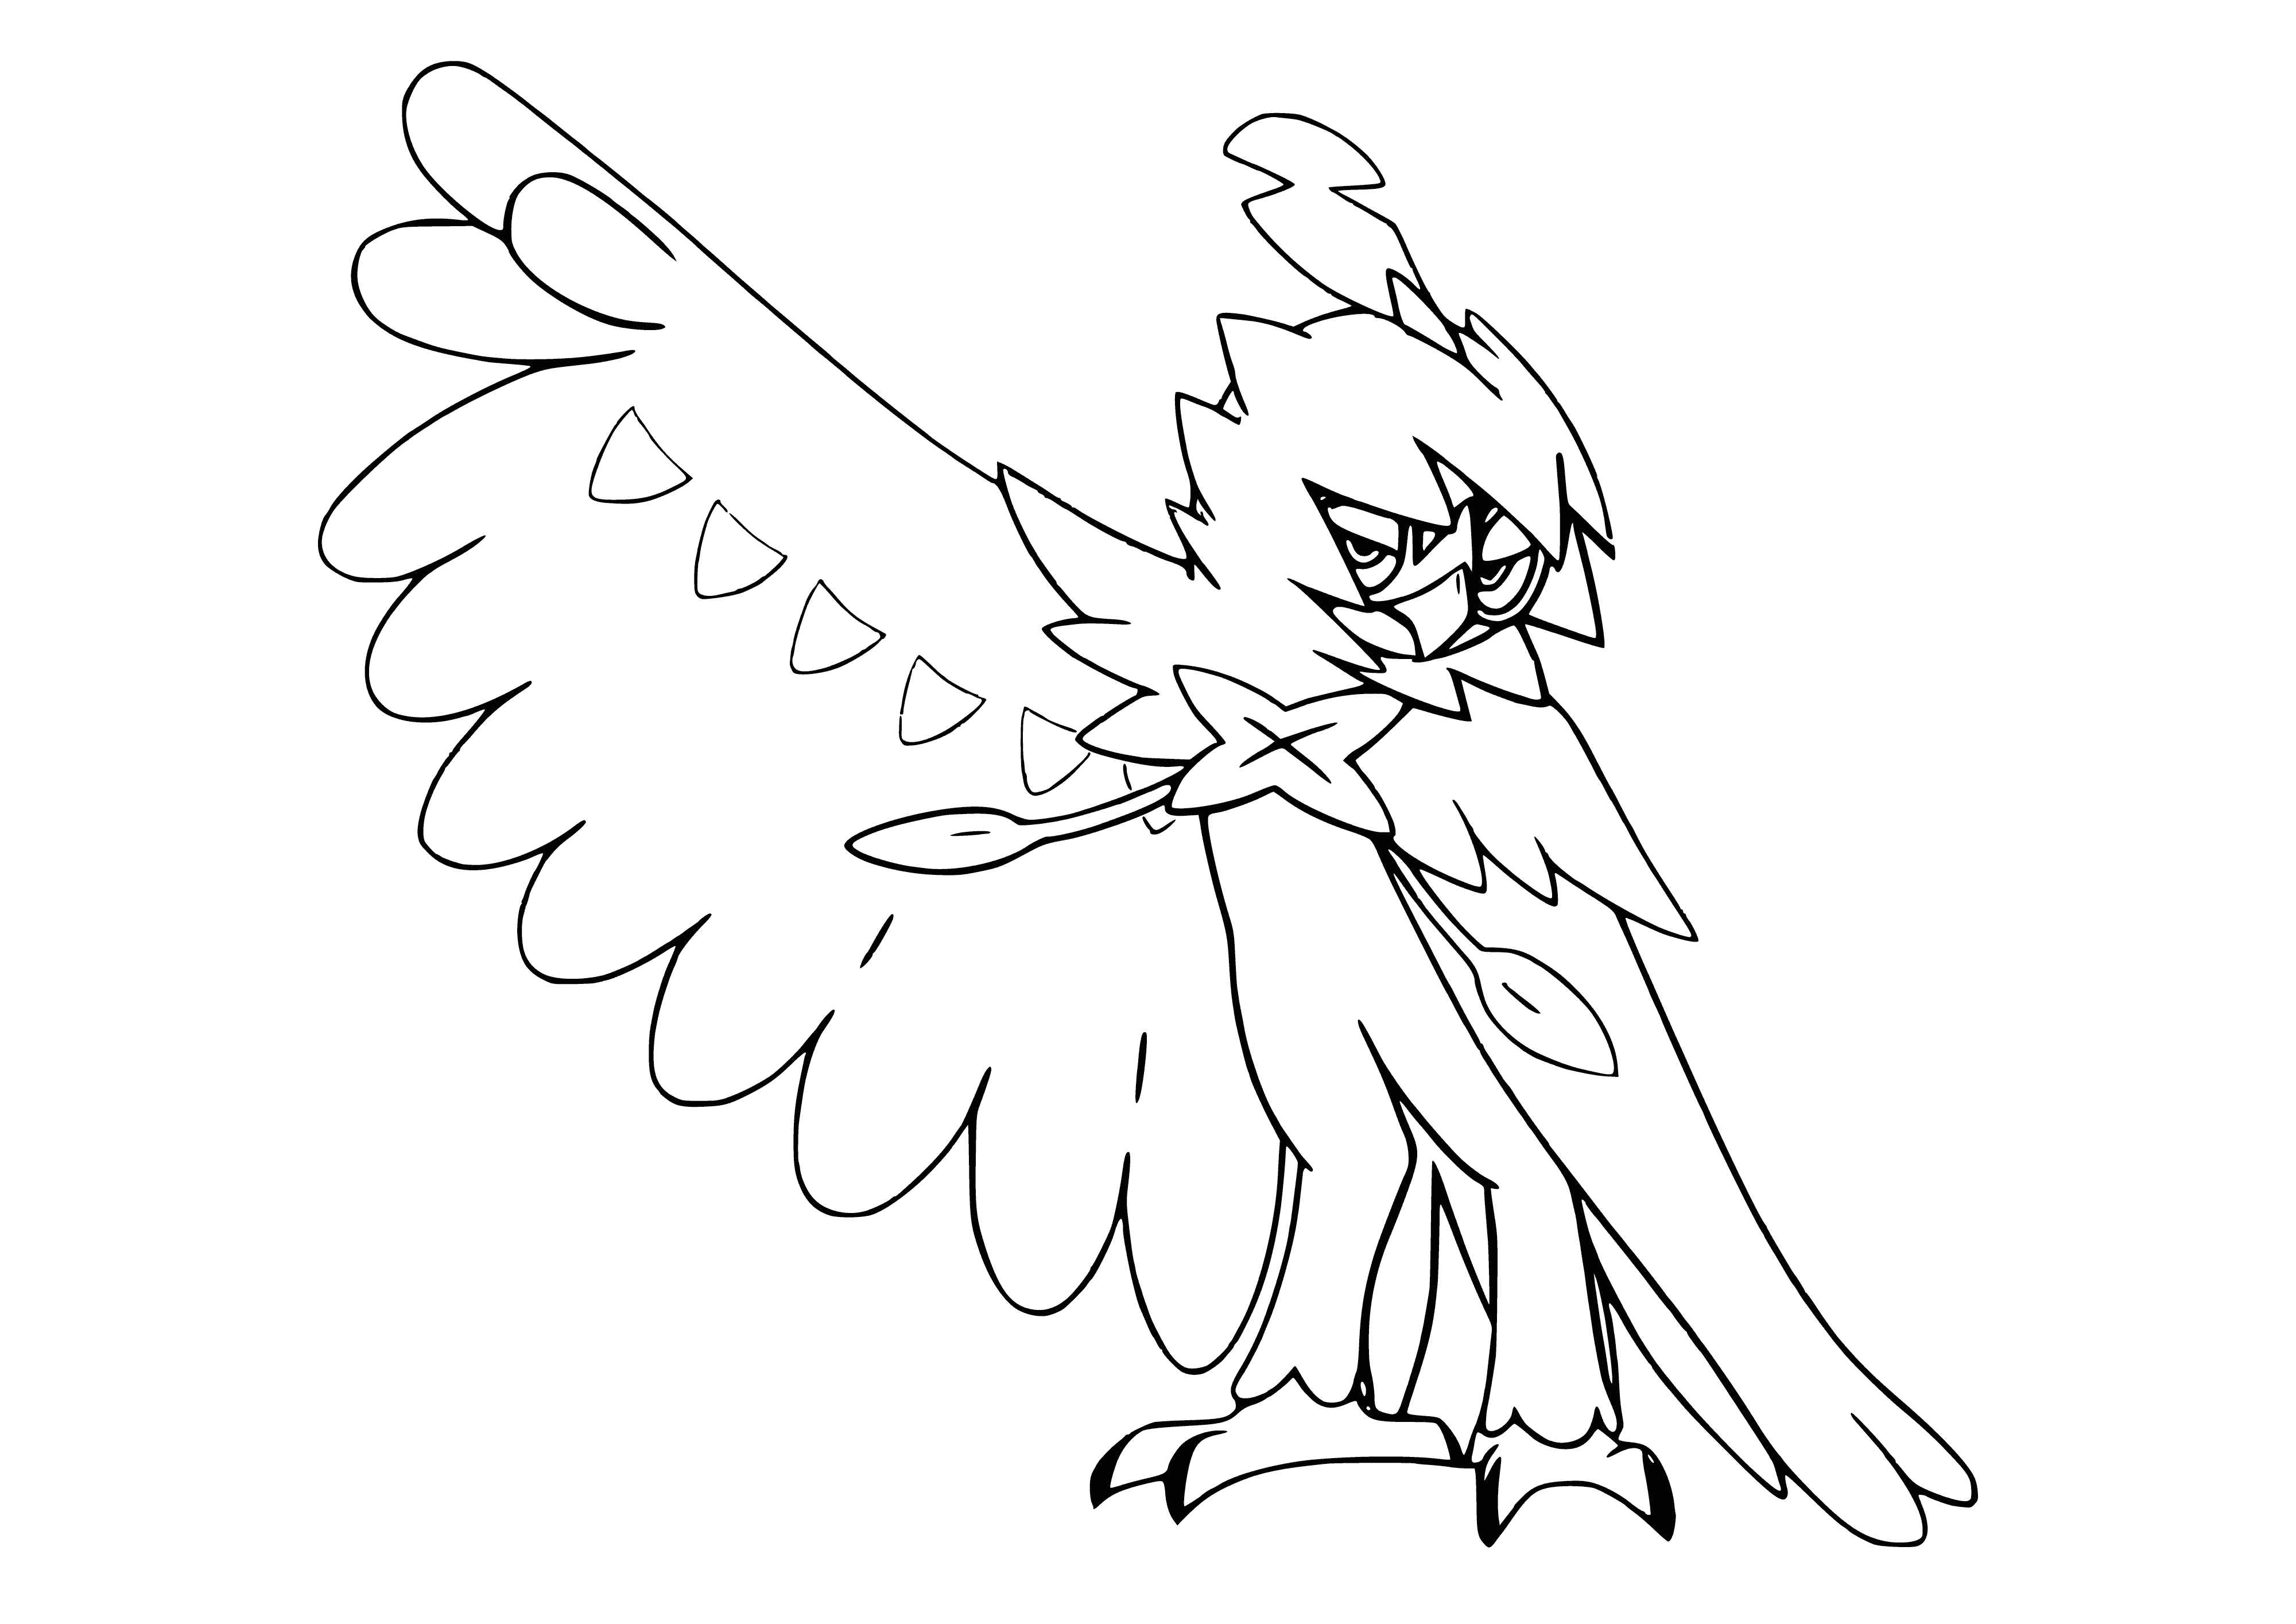 coloring page: A large, avian Pokemon with black body, red eyes, long neck, sharp beak, and tufts on head. Powerful legs ending in sharp talons and single feather on tail.